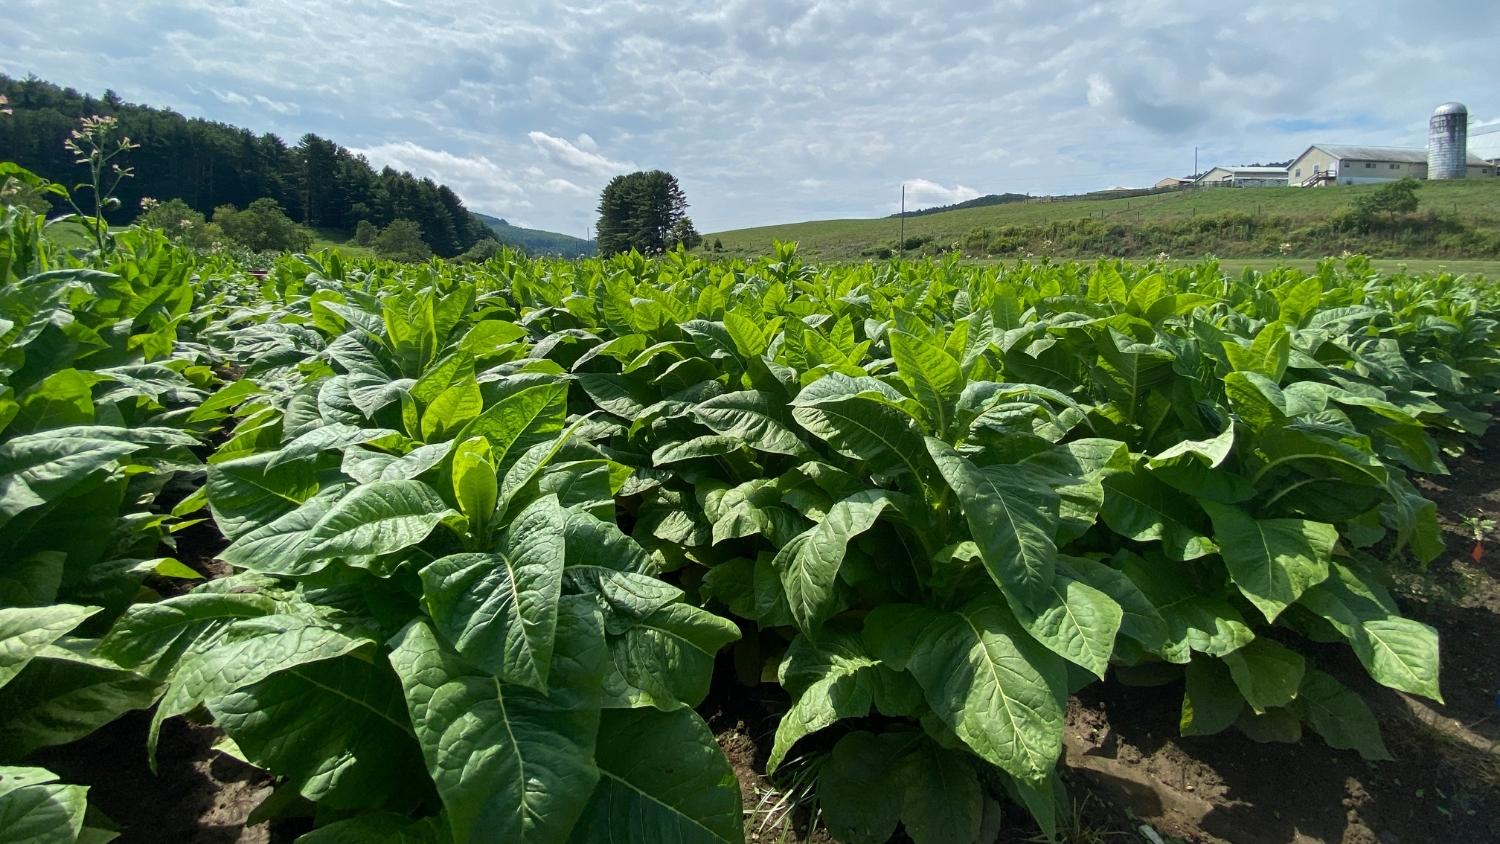 Burley tobacco growing in a NC field